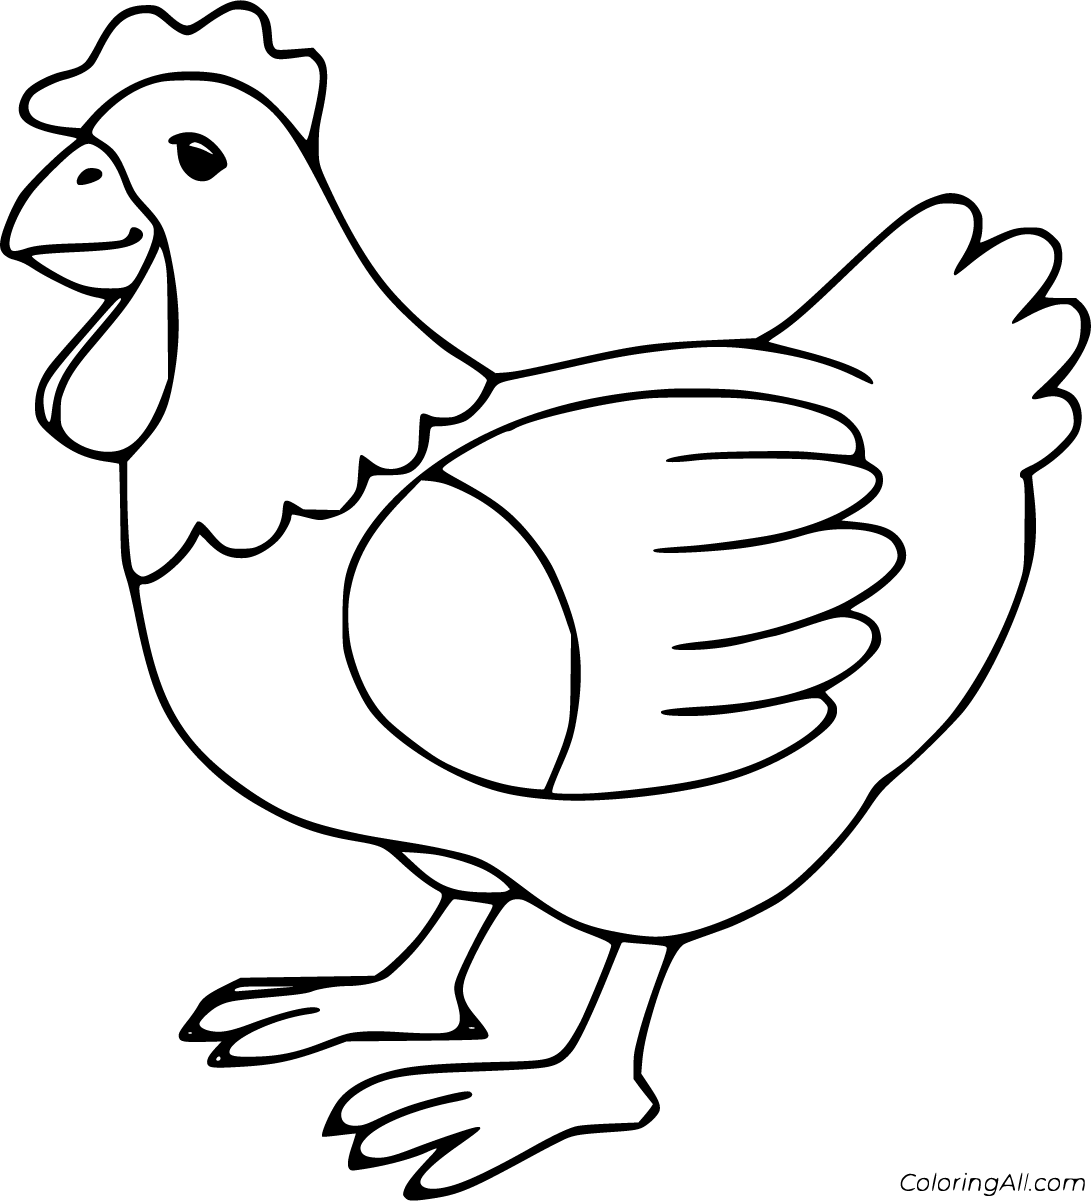 Download Chicken Coloring Pages - ColoringAll